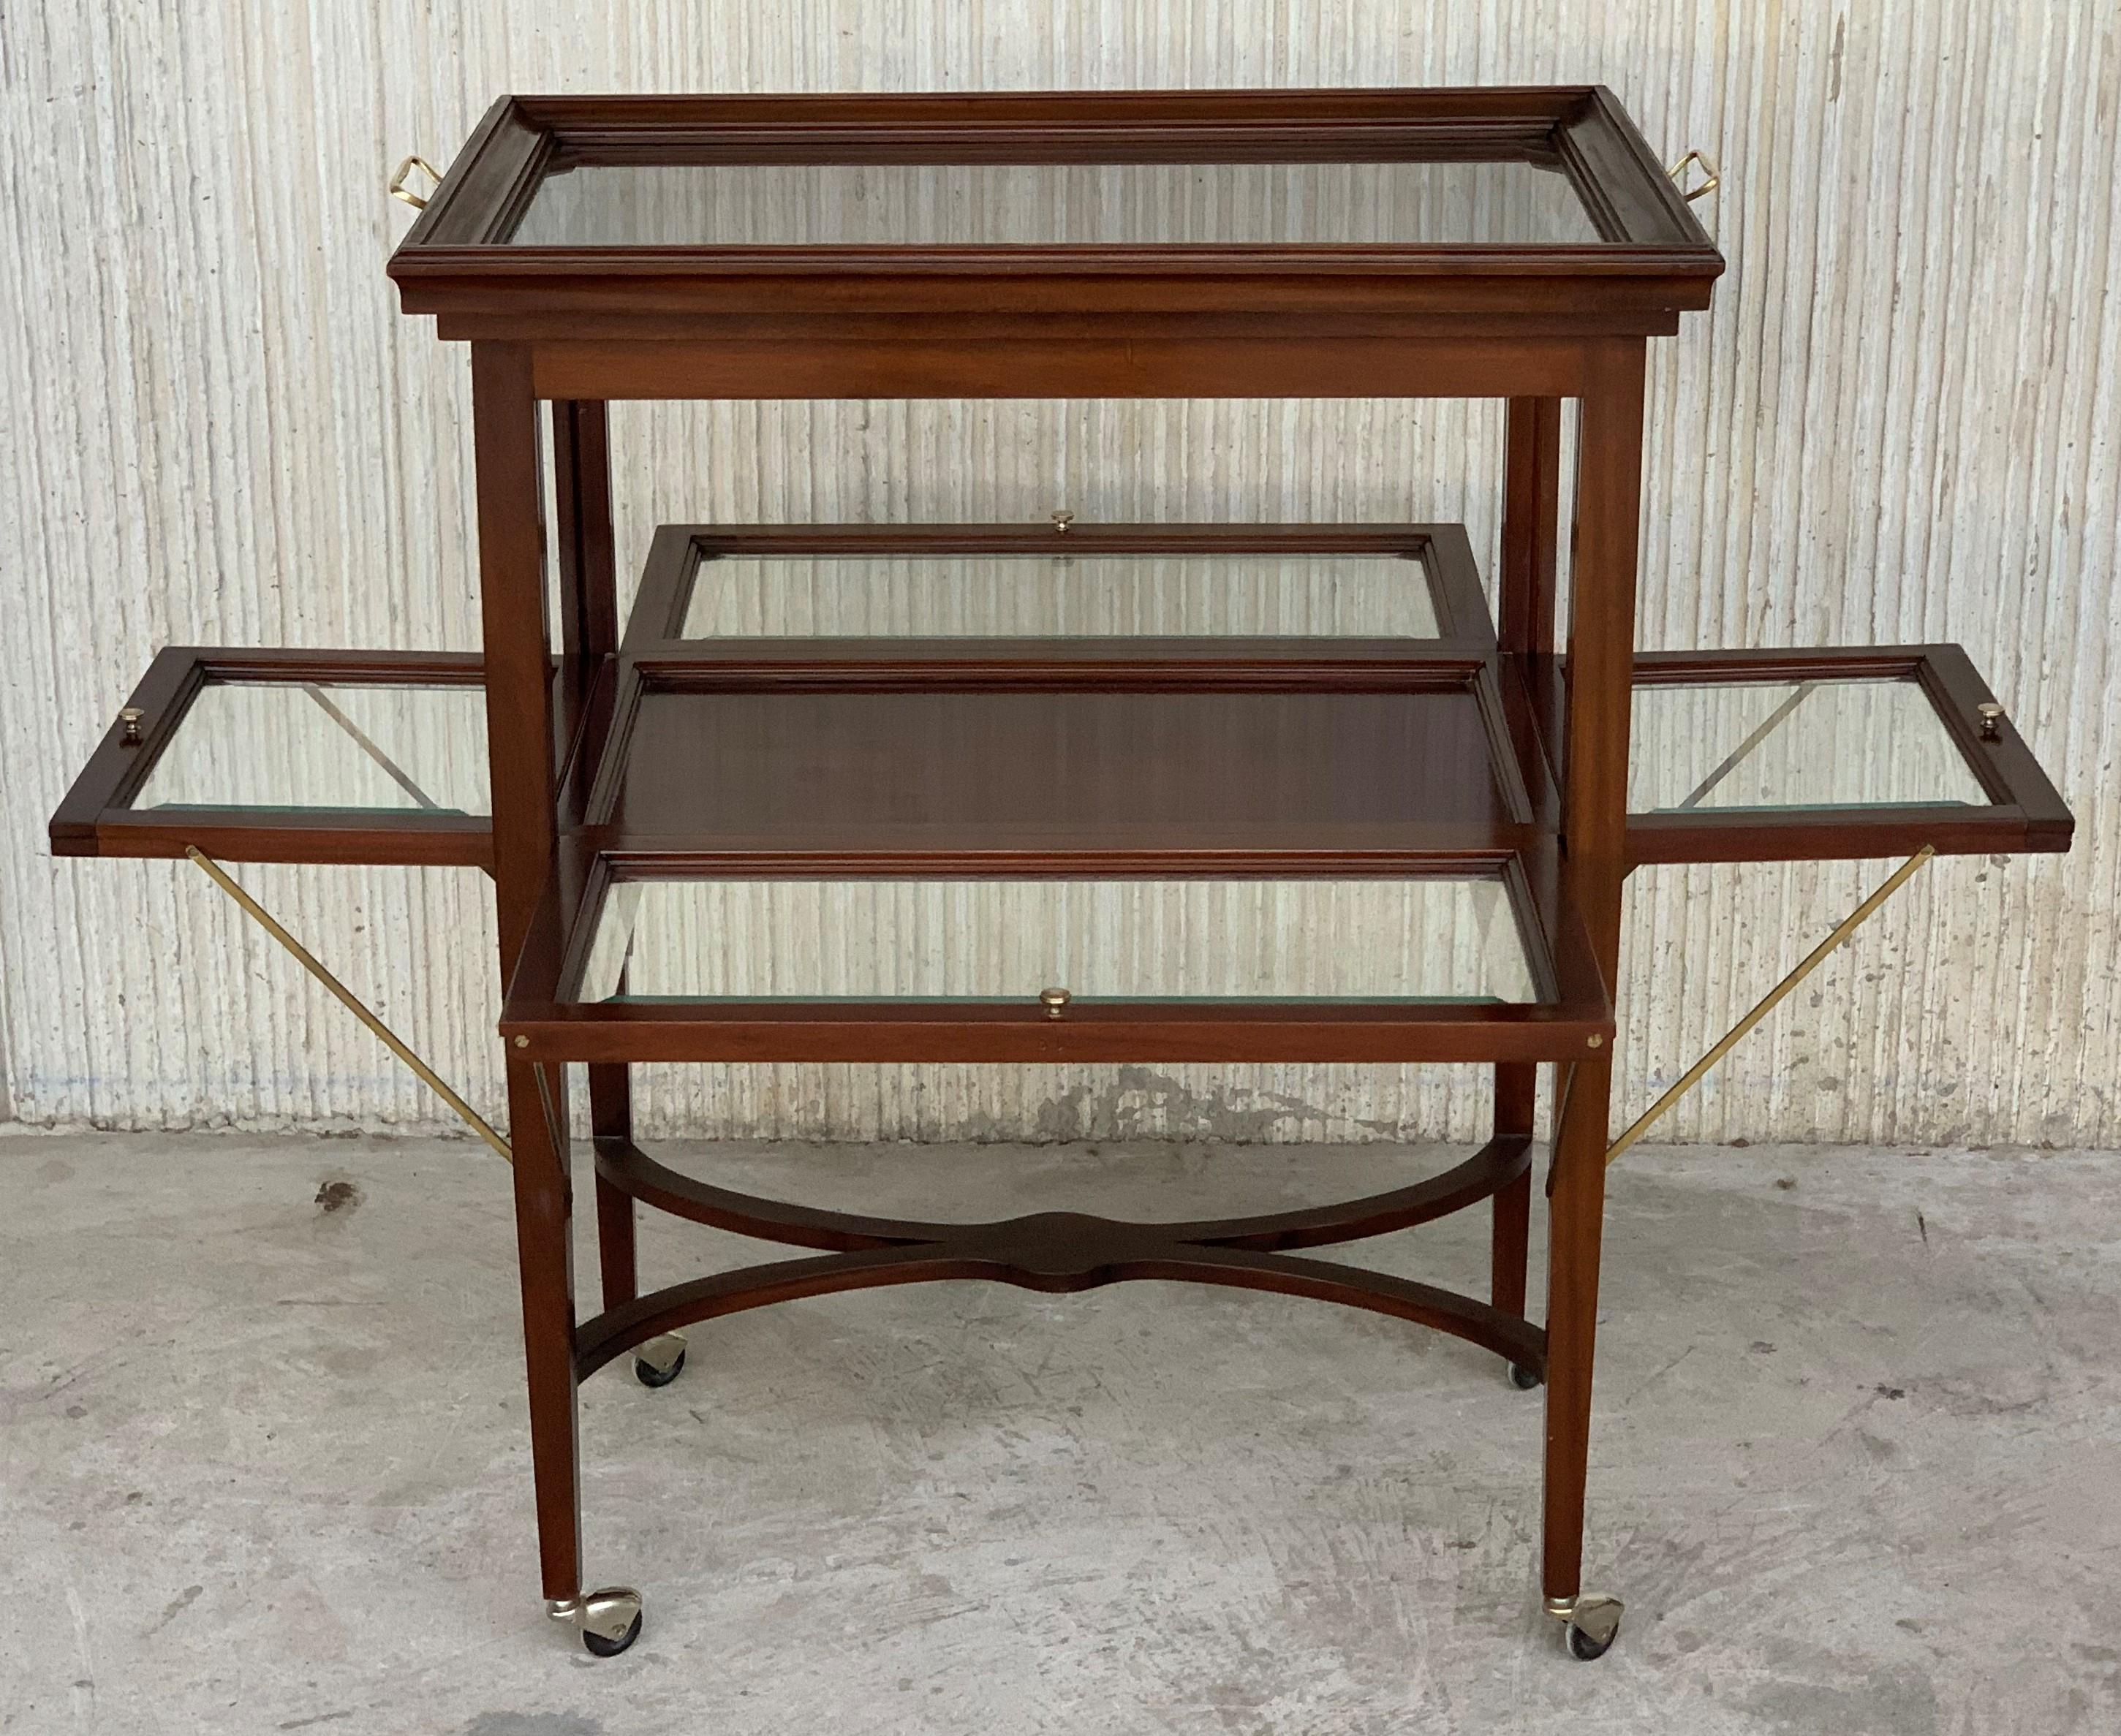 19th Century Art Decó French Neoclassical Mahogany Showcase Tea Table or Serving Table, 1920s